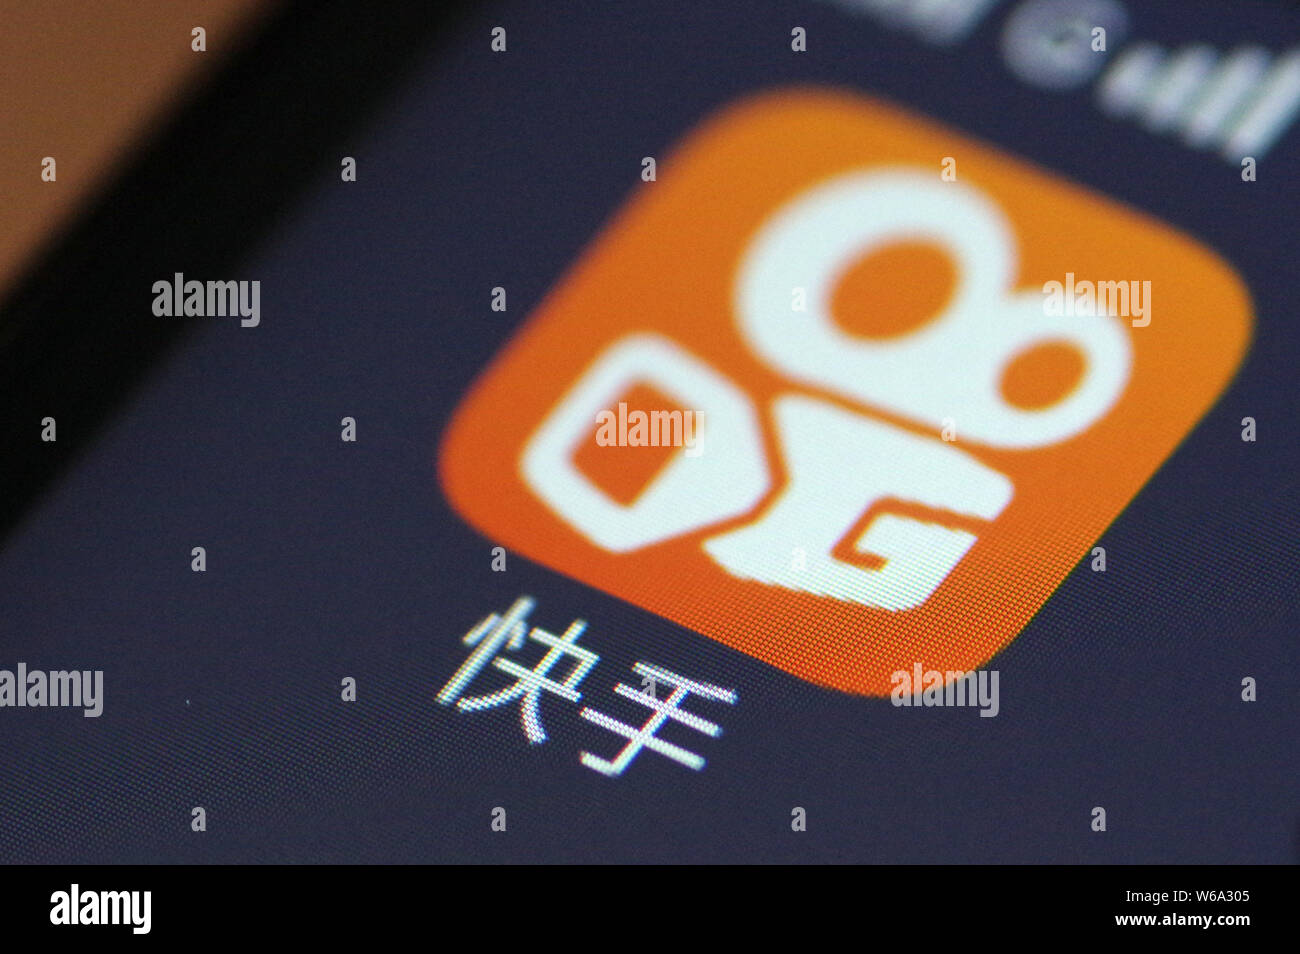 Exclusive: Chinese short-video app Kwai shuts ops in India